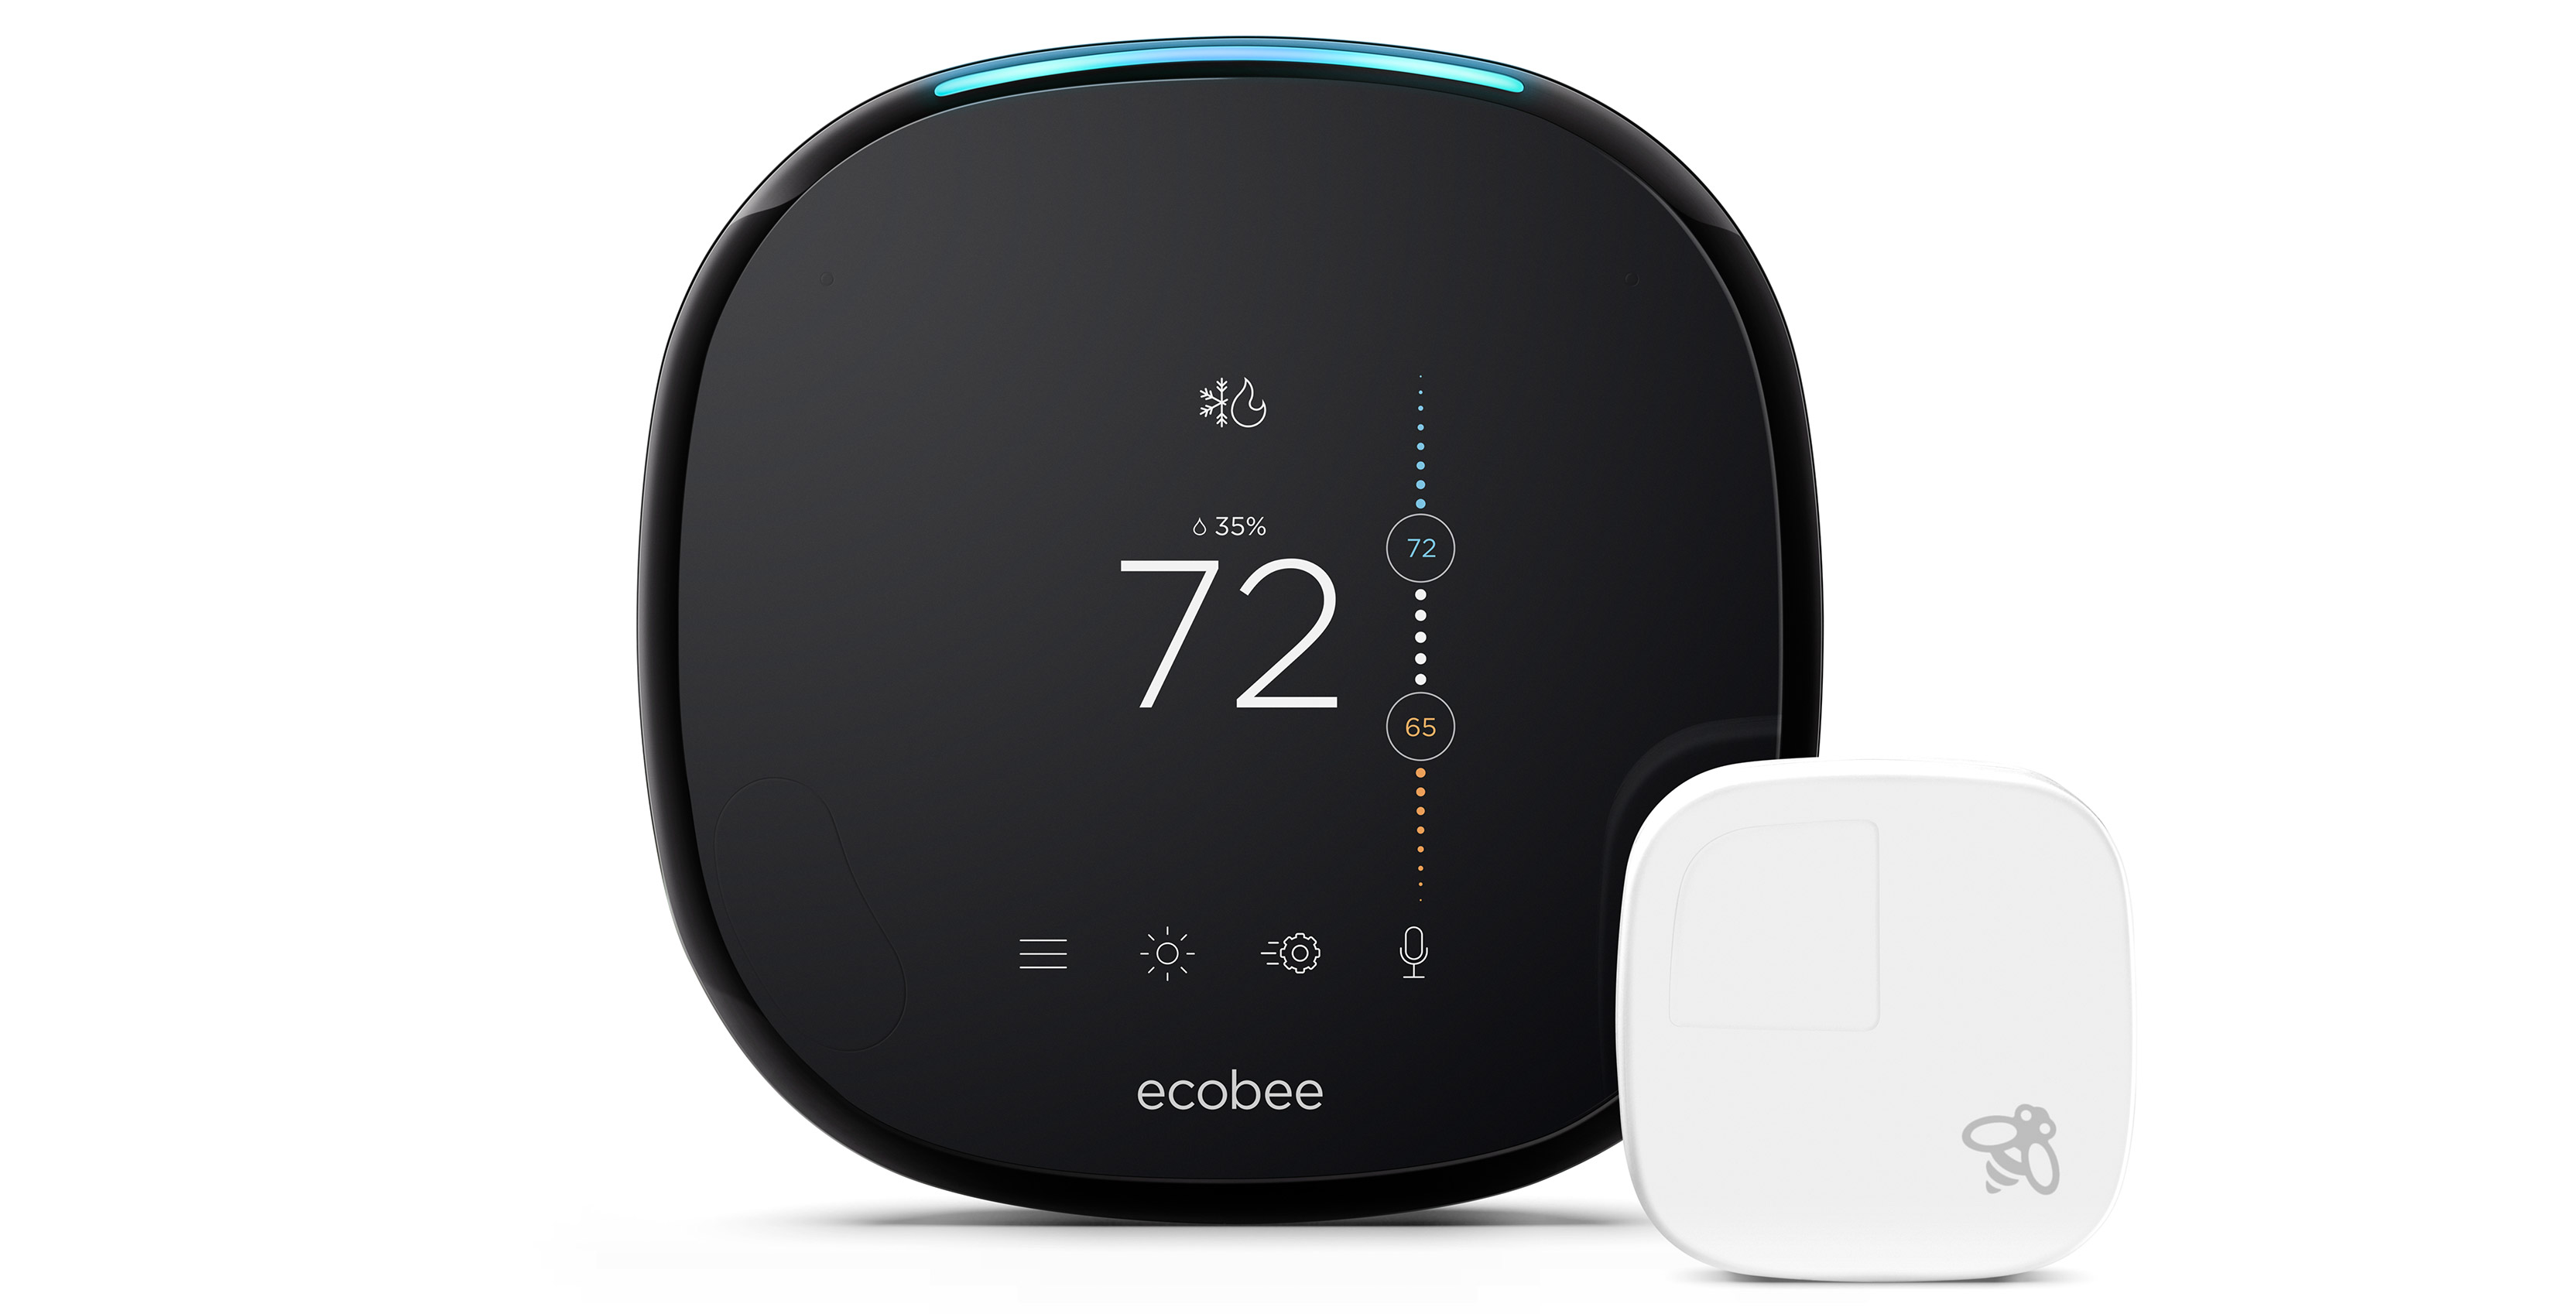 ecobee launches next gen smart thermostat with builtin Alexa in the US